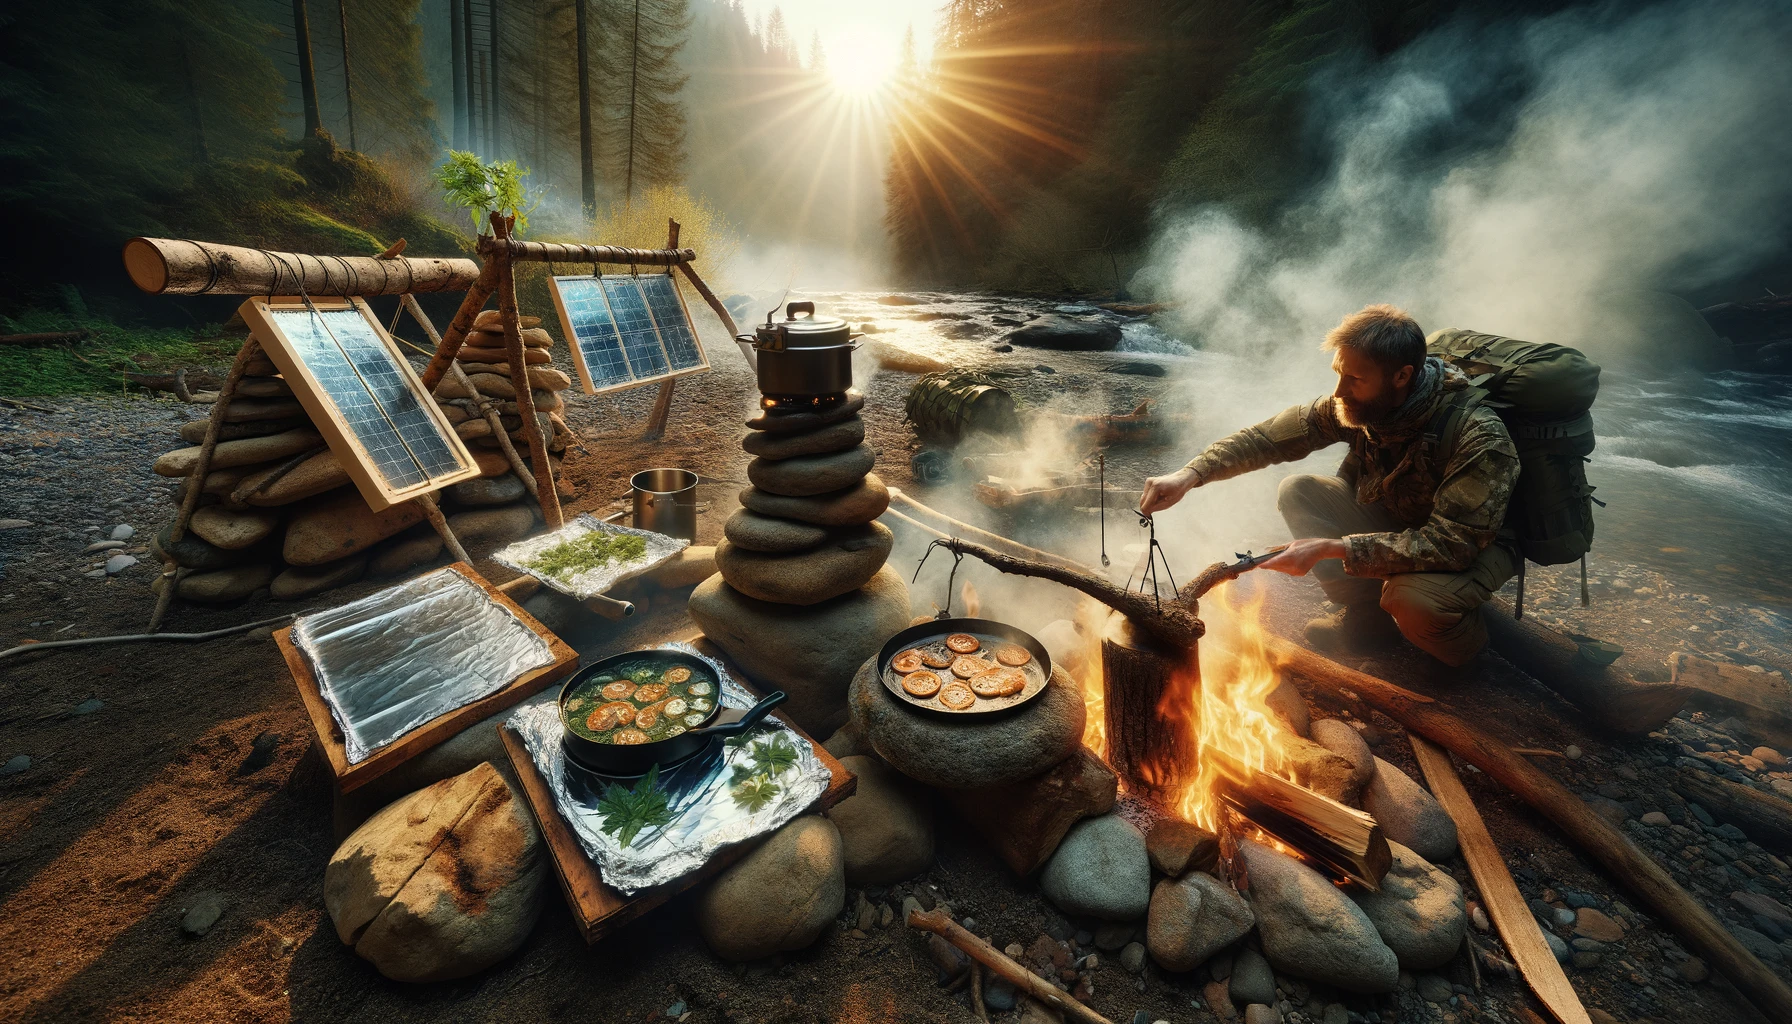 Innovative survival campfire cooking methods displayed in the wilderness, featuring a reflector oven, solar cooker, and a hand-crafted wood stove, with preppers employing a rock slab griddle and a makeshift smoker against a backdrop of a lush forest and stream at sunset